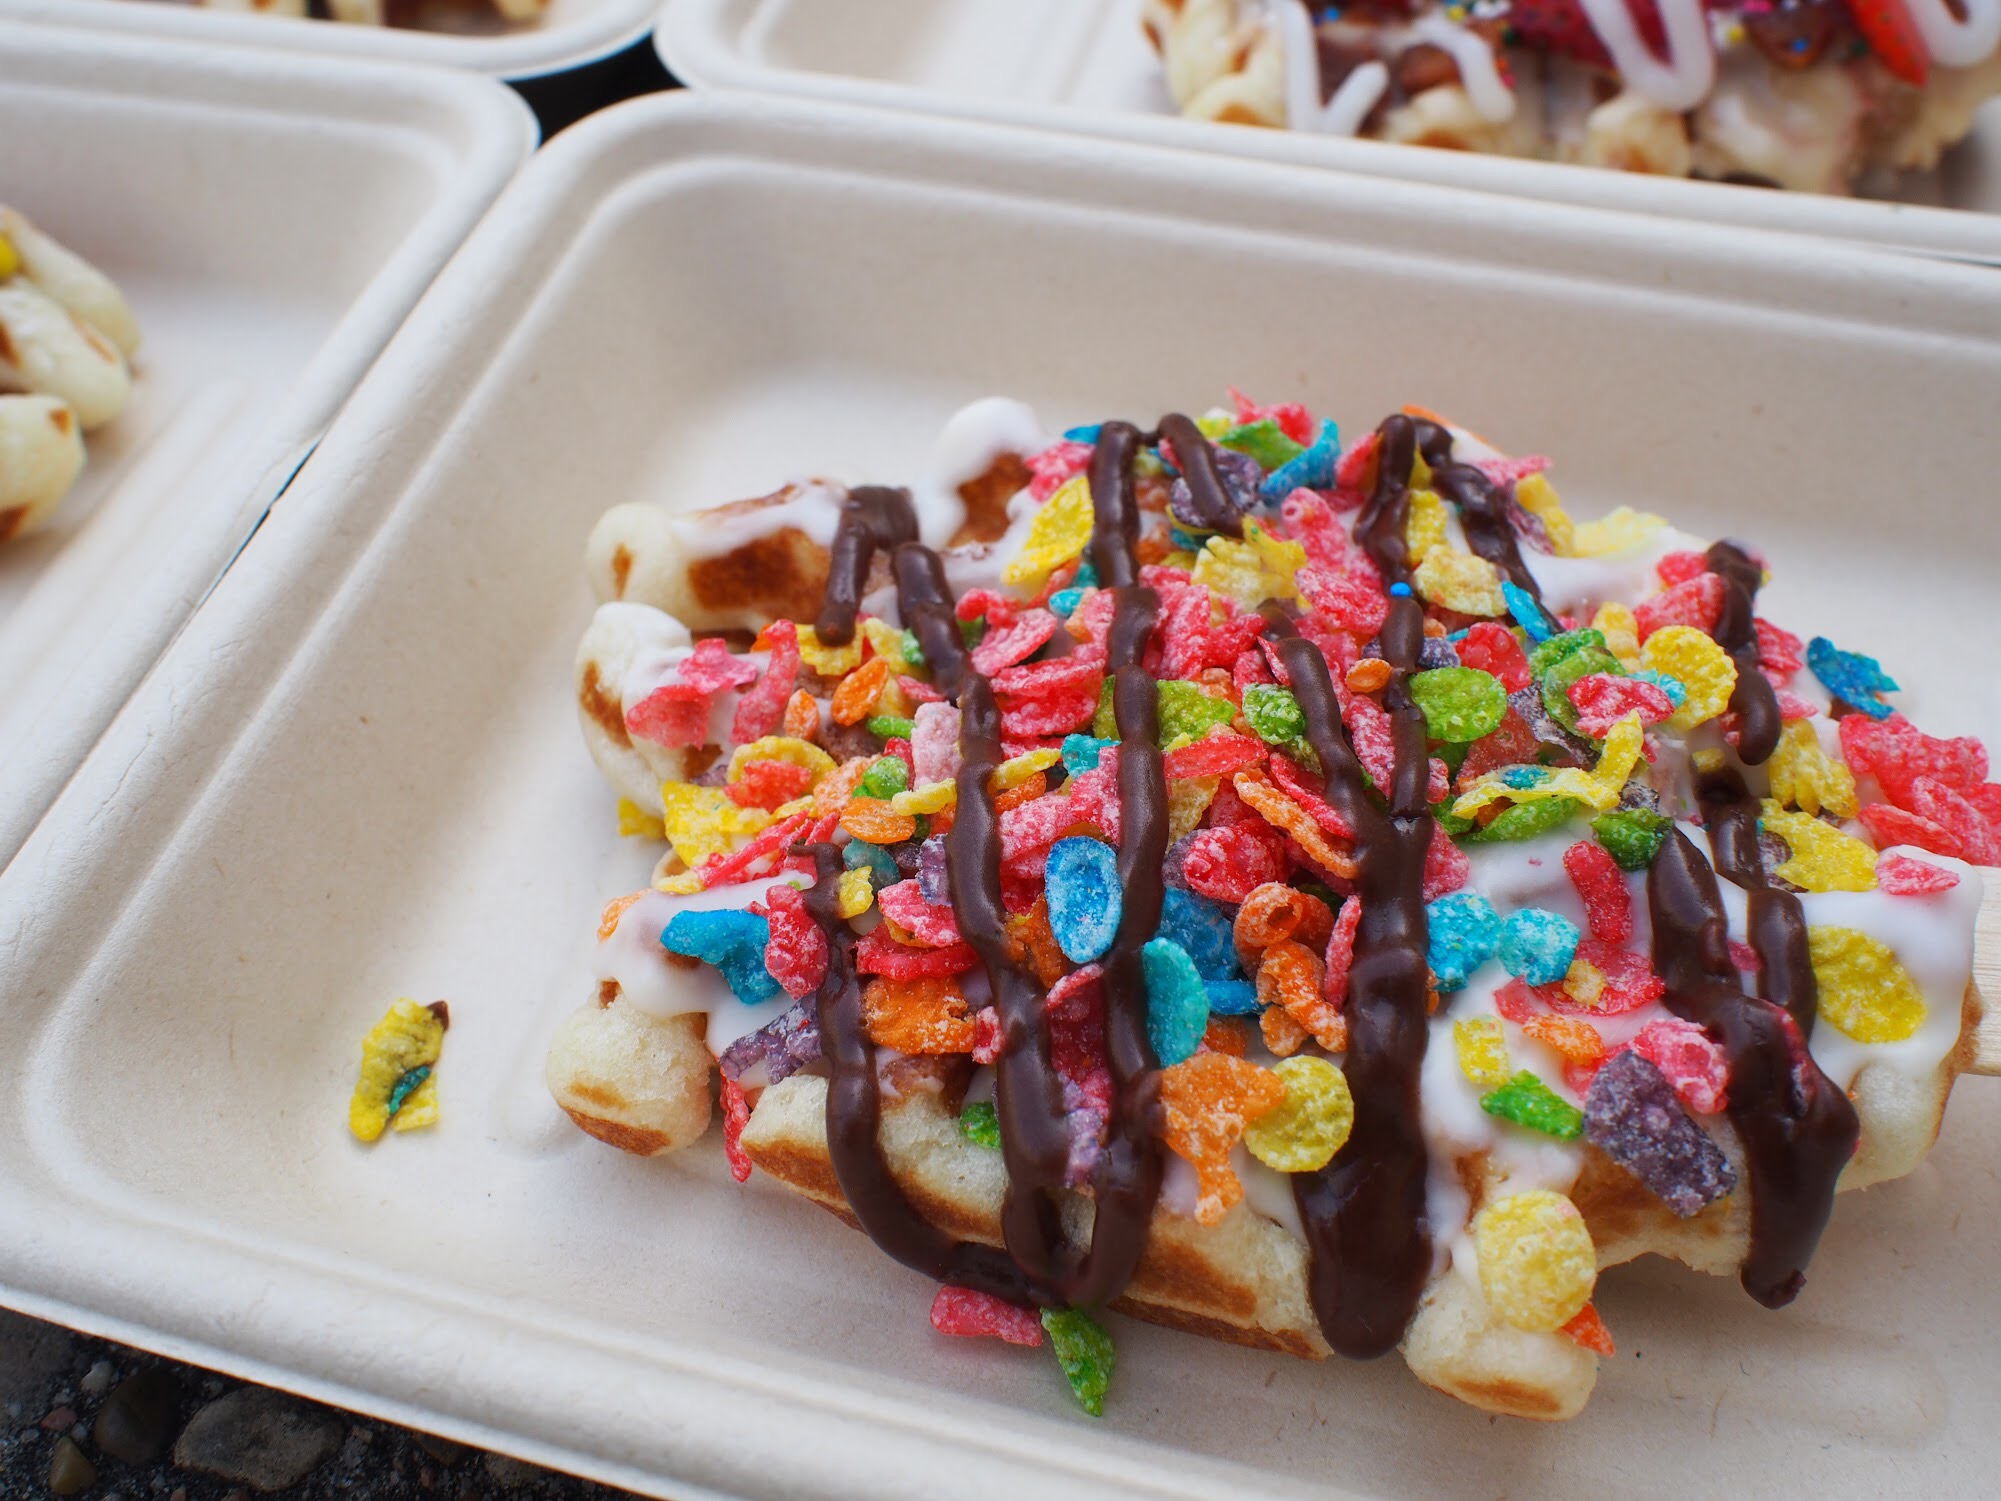 A Belgian waffle topped with colorful Fruity Pebbles cereal and white sauce and a chocolate drizzle